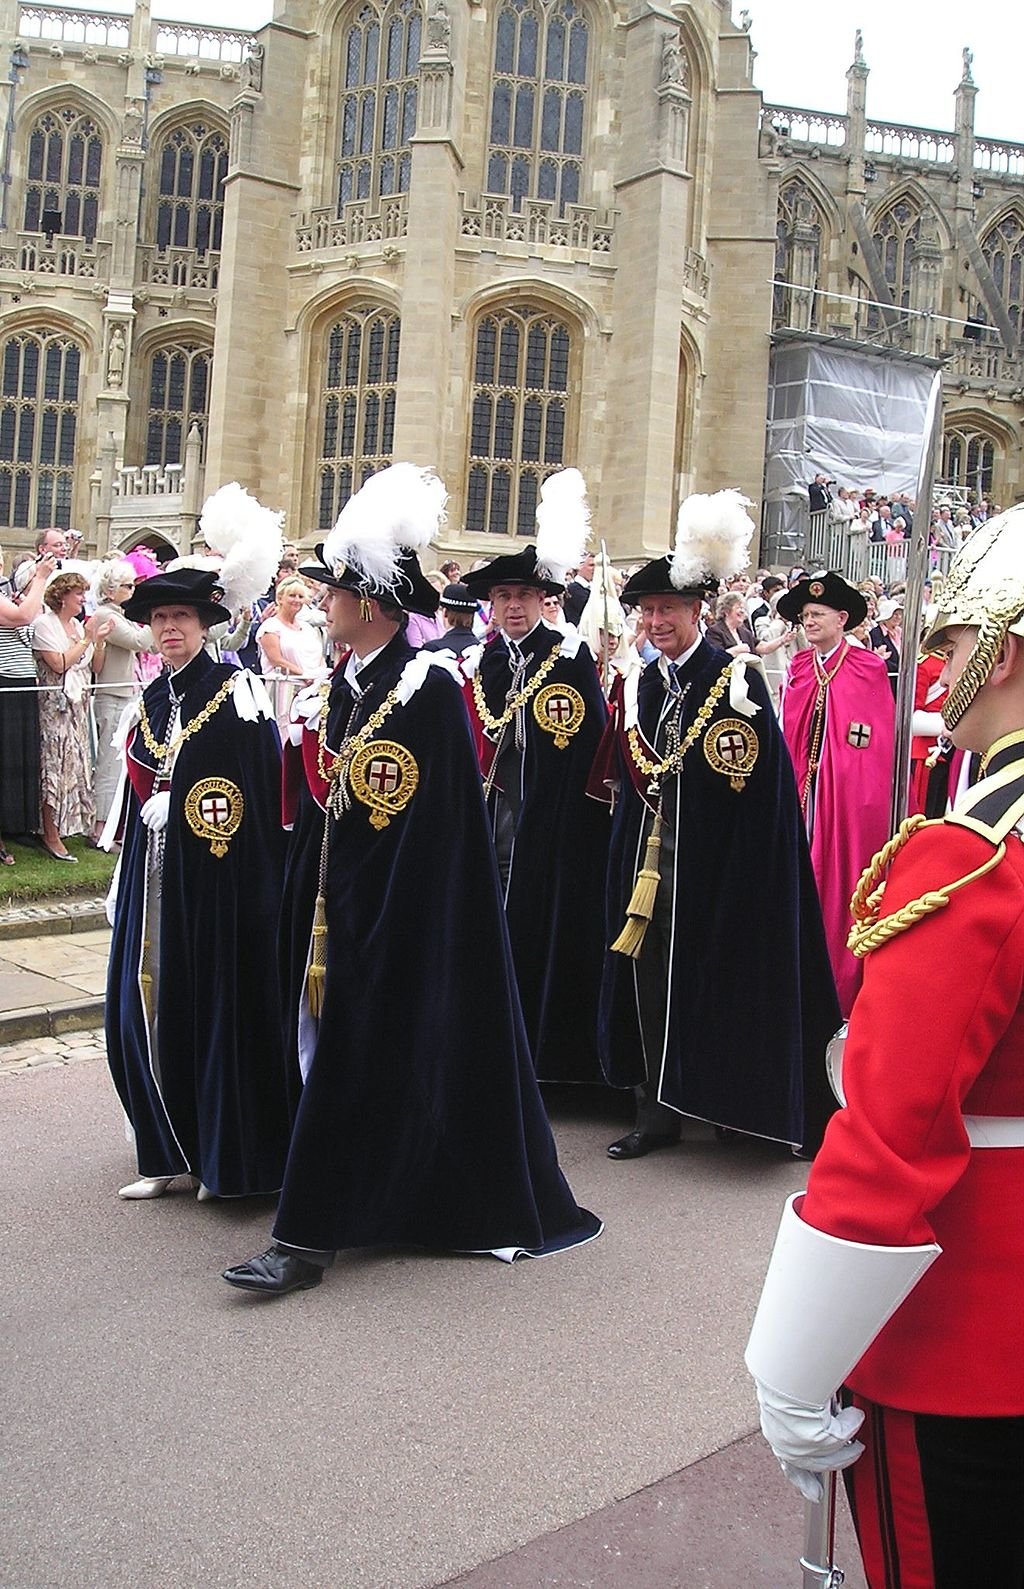 "File:Royal Knights of the Garter.jpg" by Philip Allfrey is licensed under CC BY-SA 2.5.